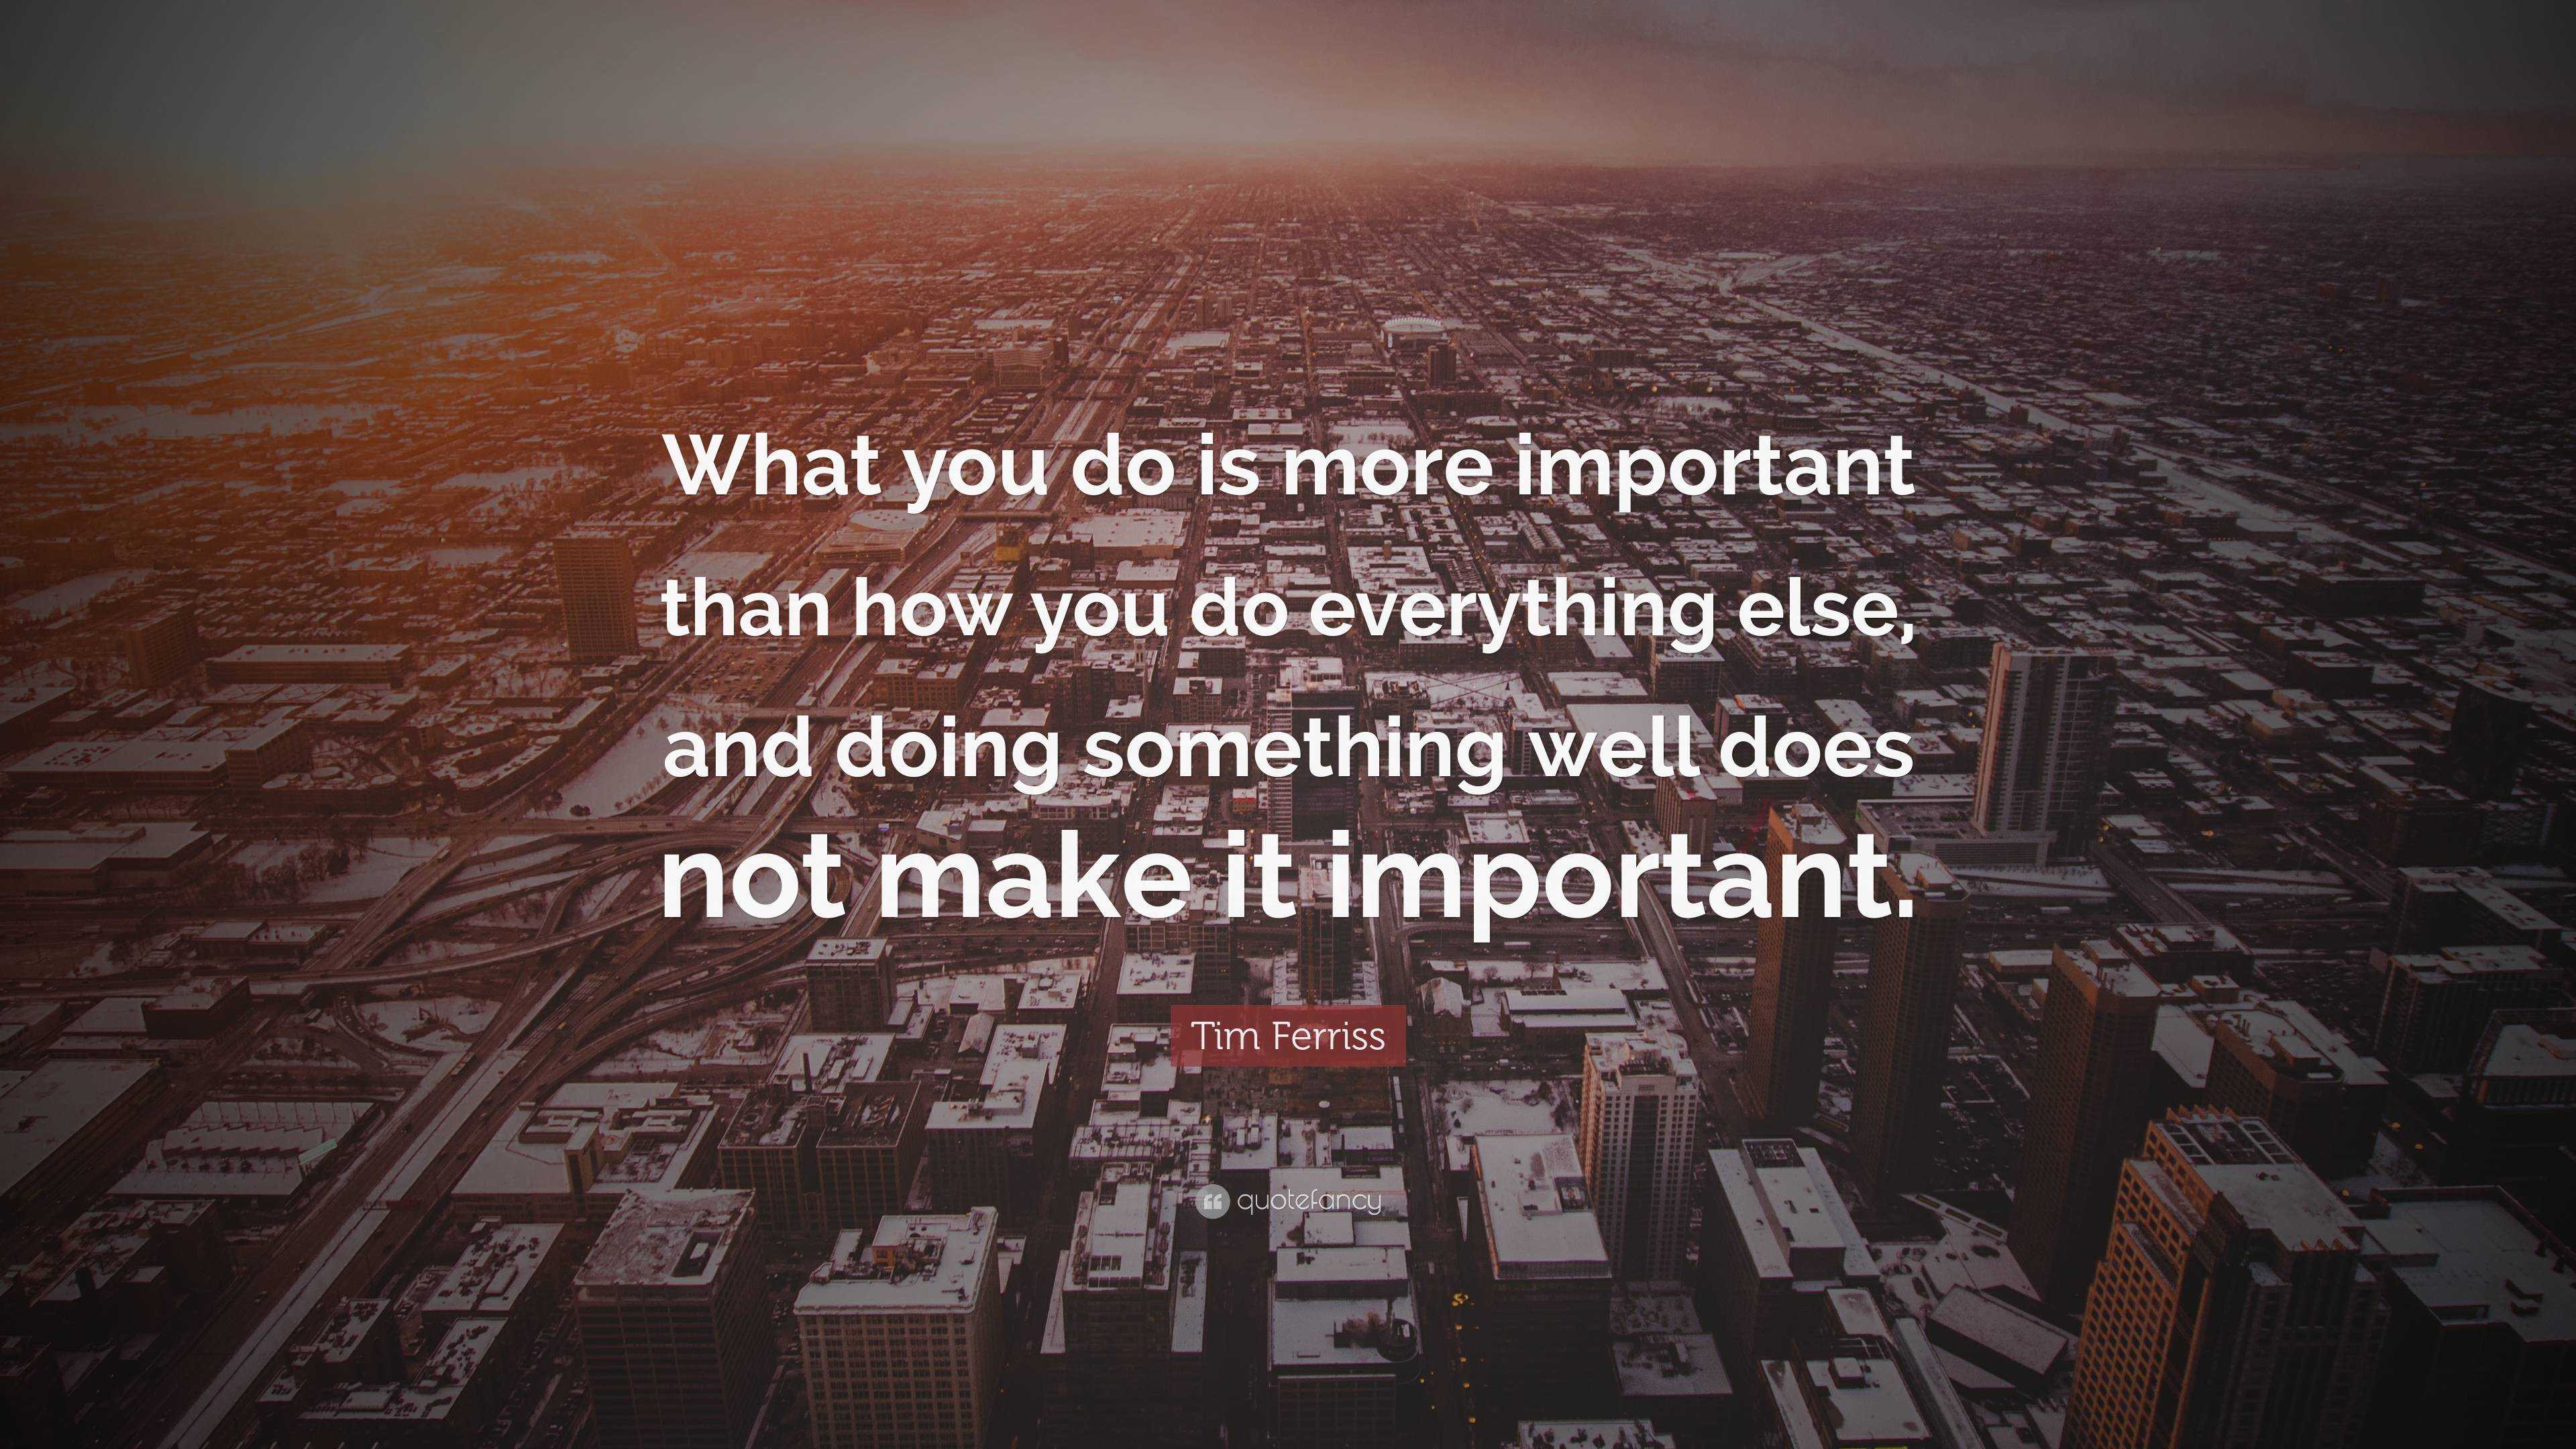 Tim Ferriss Quote: “What you do is more important than how you do ...